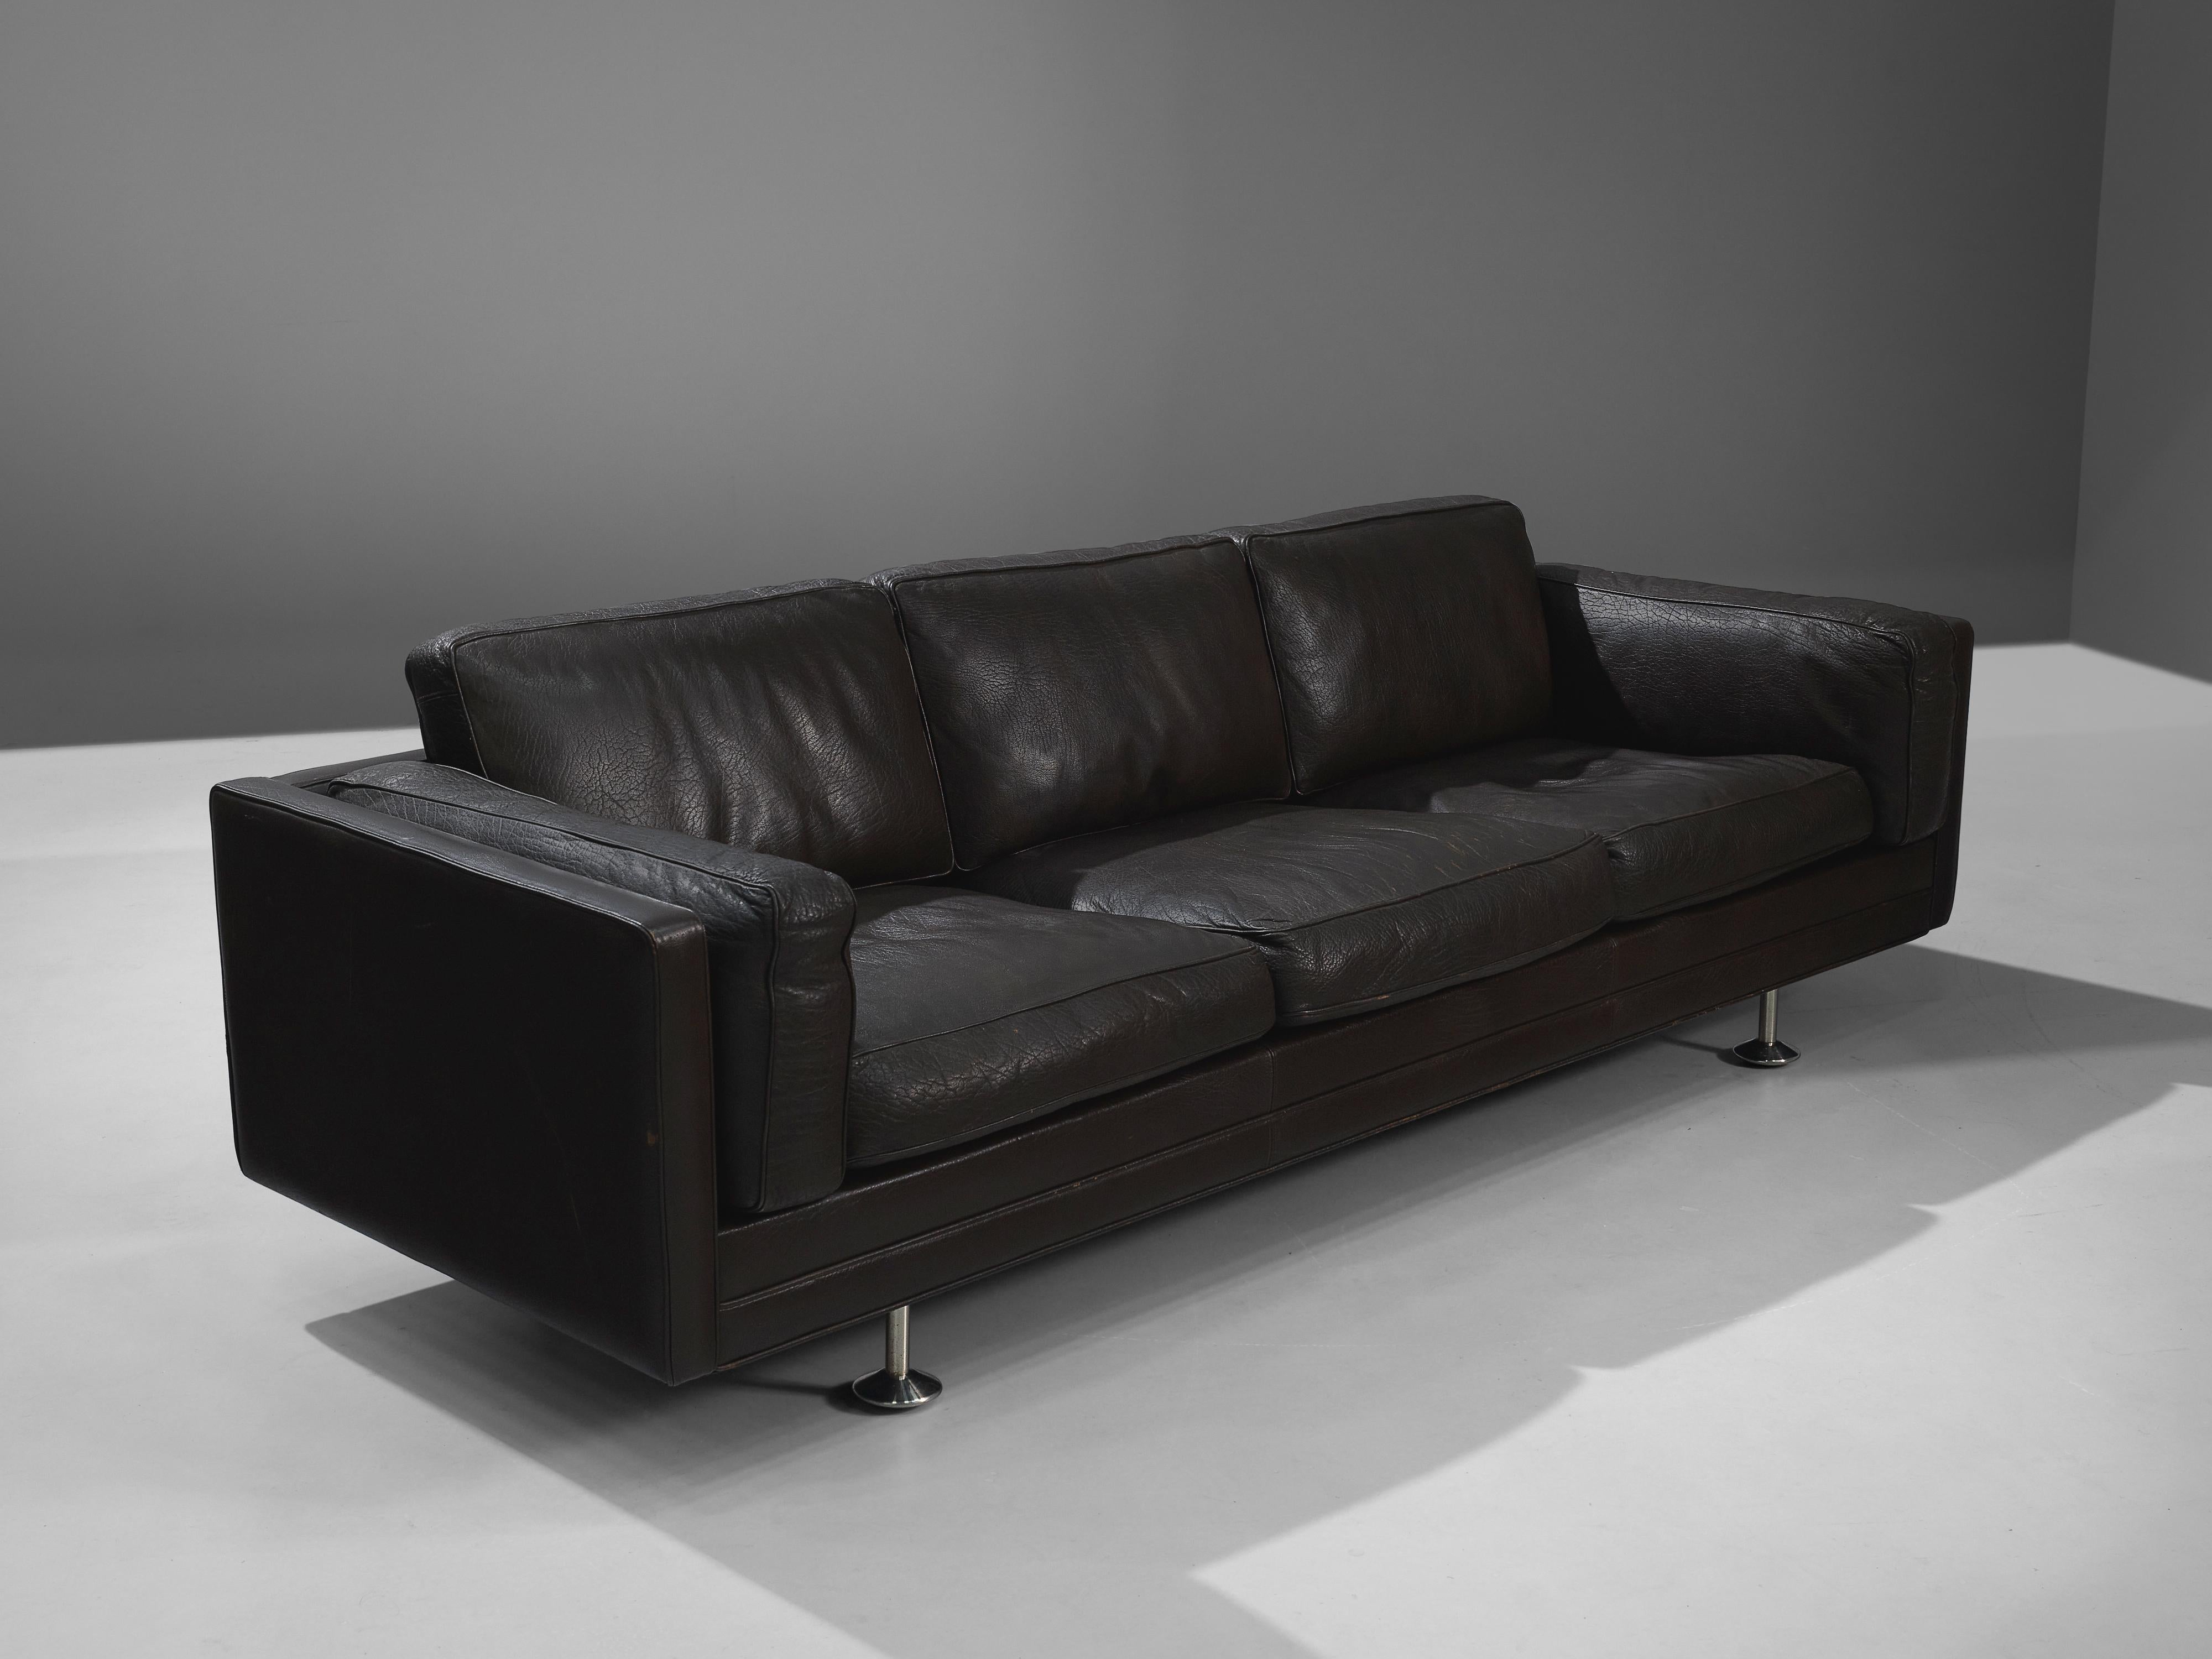 Illum Wikkelsø, sofa, leather, stainless steel, Denmark, 1960s. 

Sofa in black leather by Danish designer Illum Wikkelsø. This sofa has a cubic design. The tight and clean outside is complemented with a soft and comfortable inside. The four